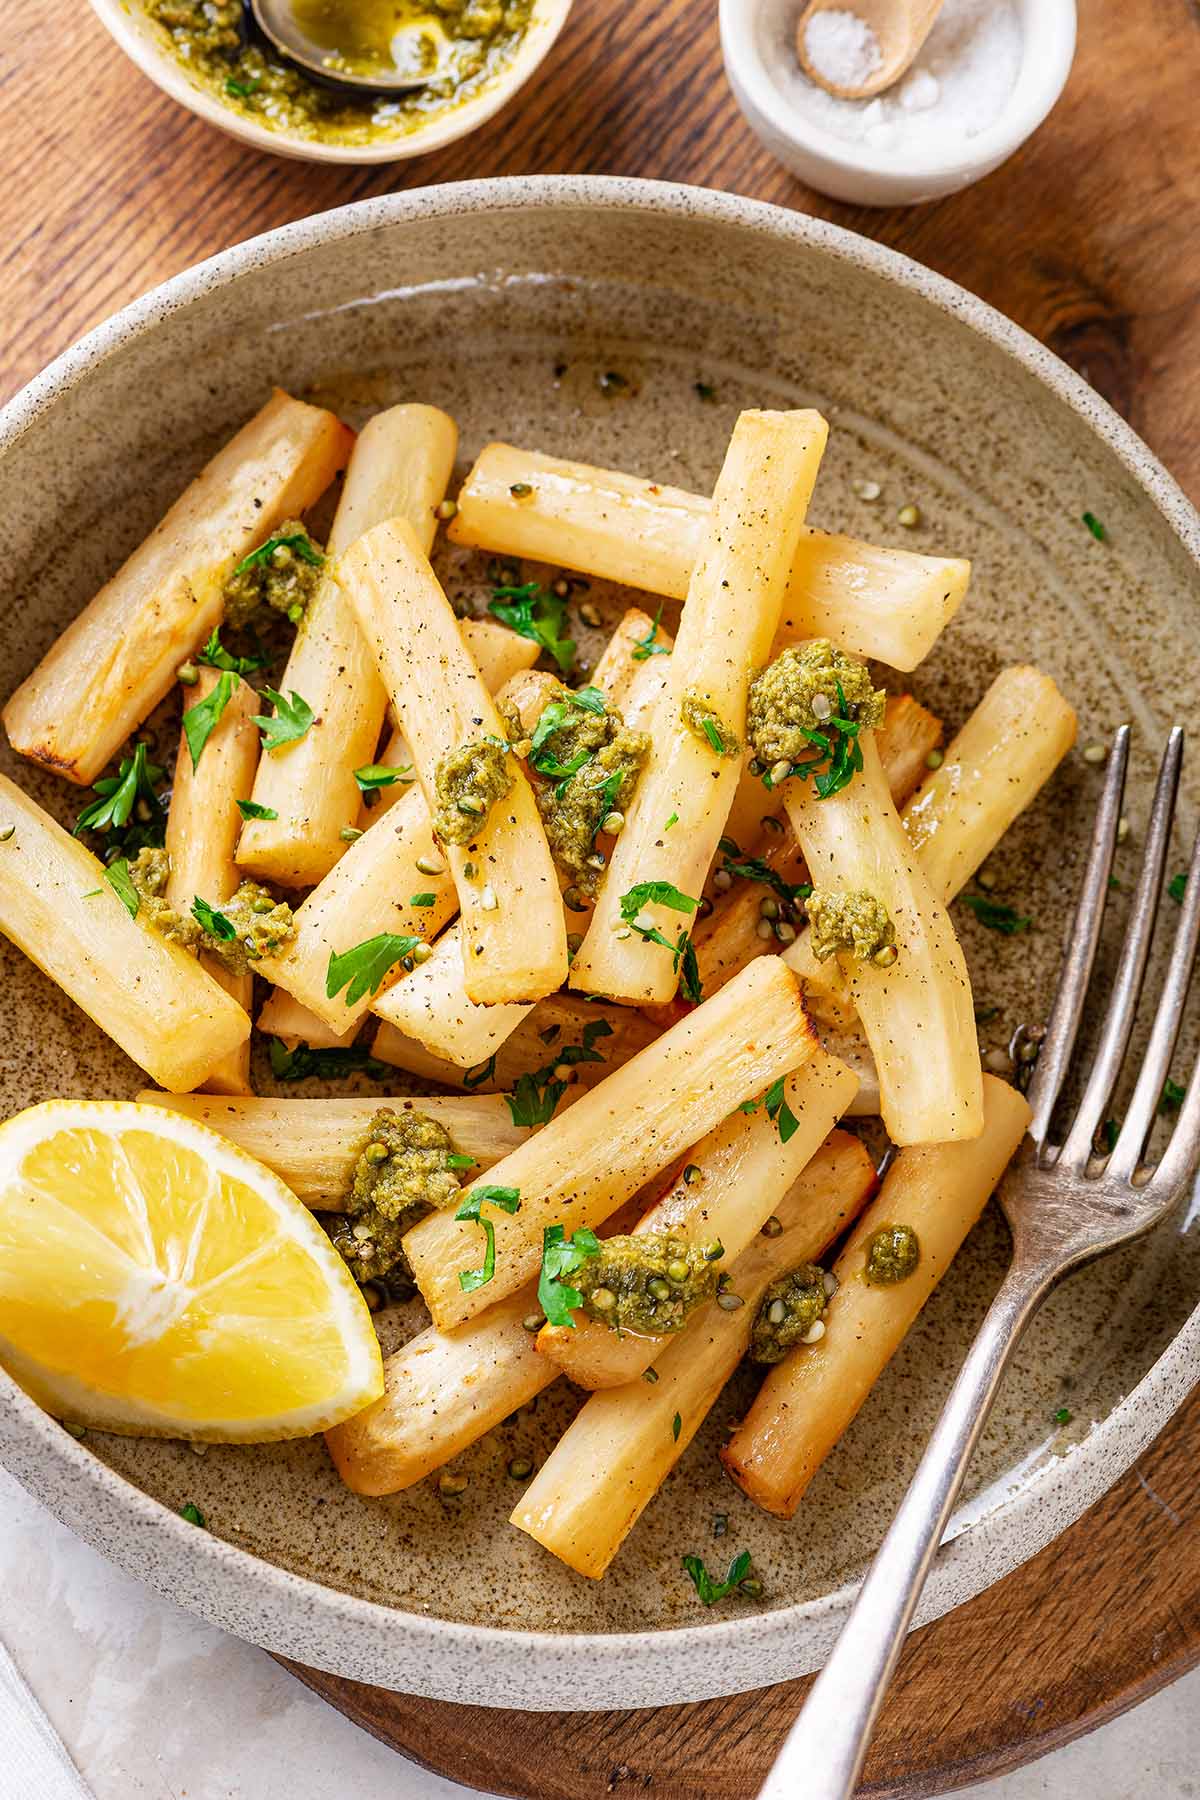 Roasted black salsify served with pesto and fresh parsley